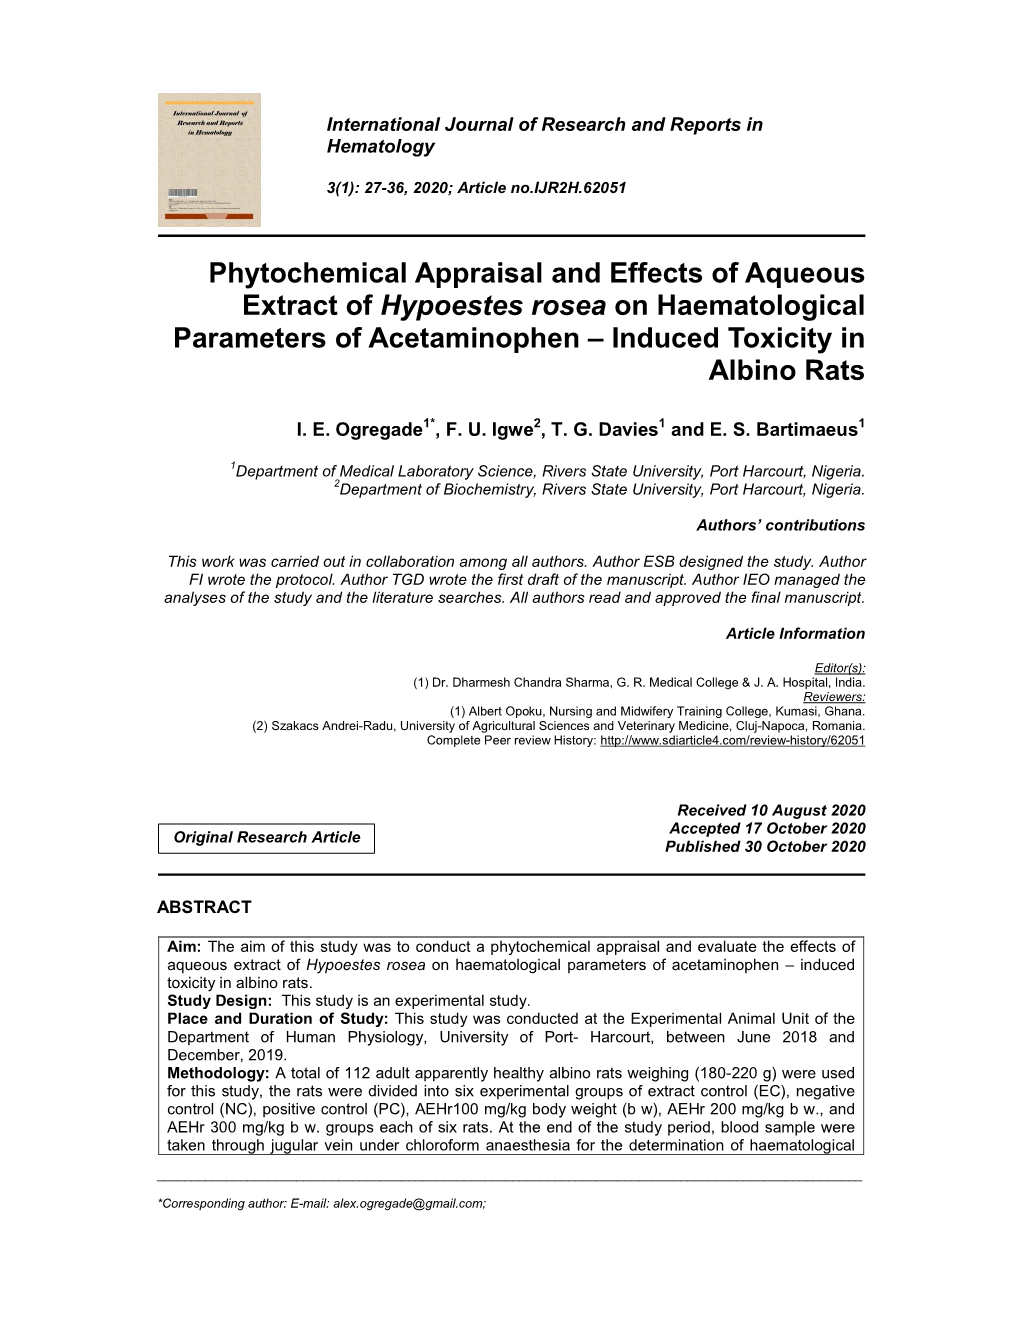 Phytochemical Appraisal and Effects of Aqueous Extract of Hypoestes Rosea on Haematological Parameters of Acetaminophen – Induced Toxicity in Albino Rats